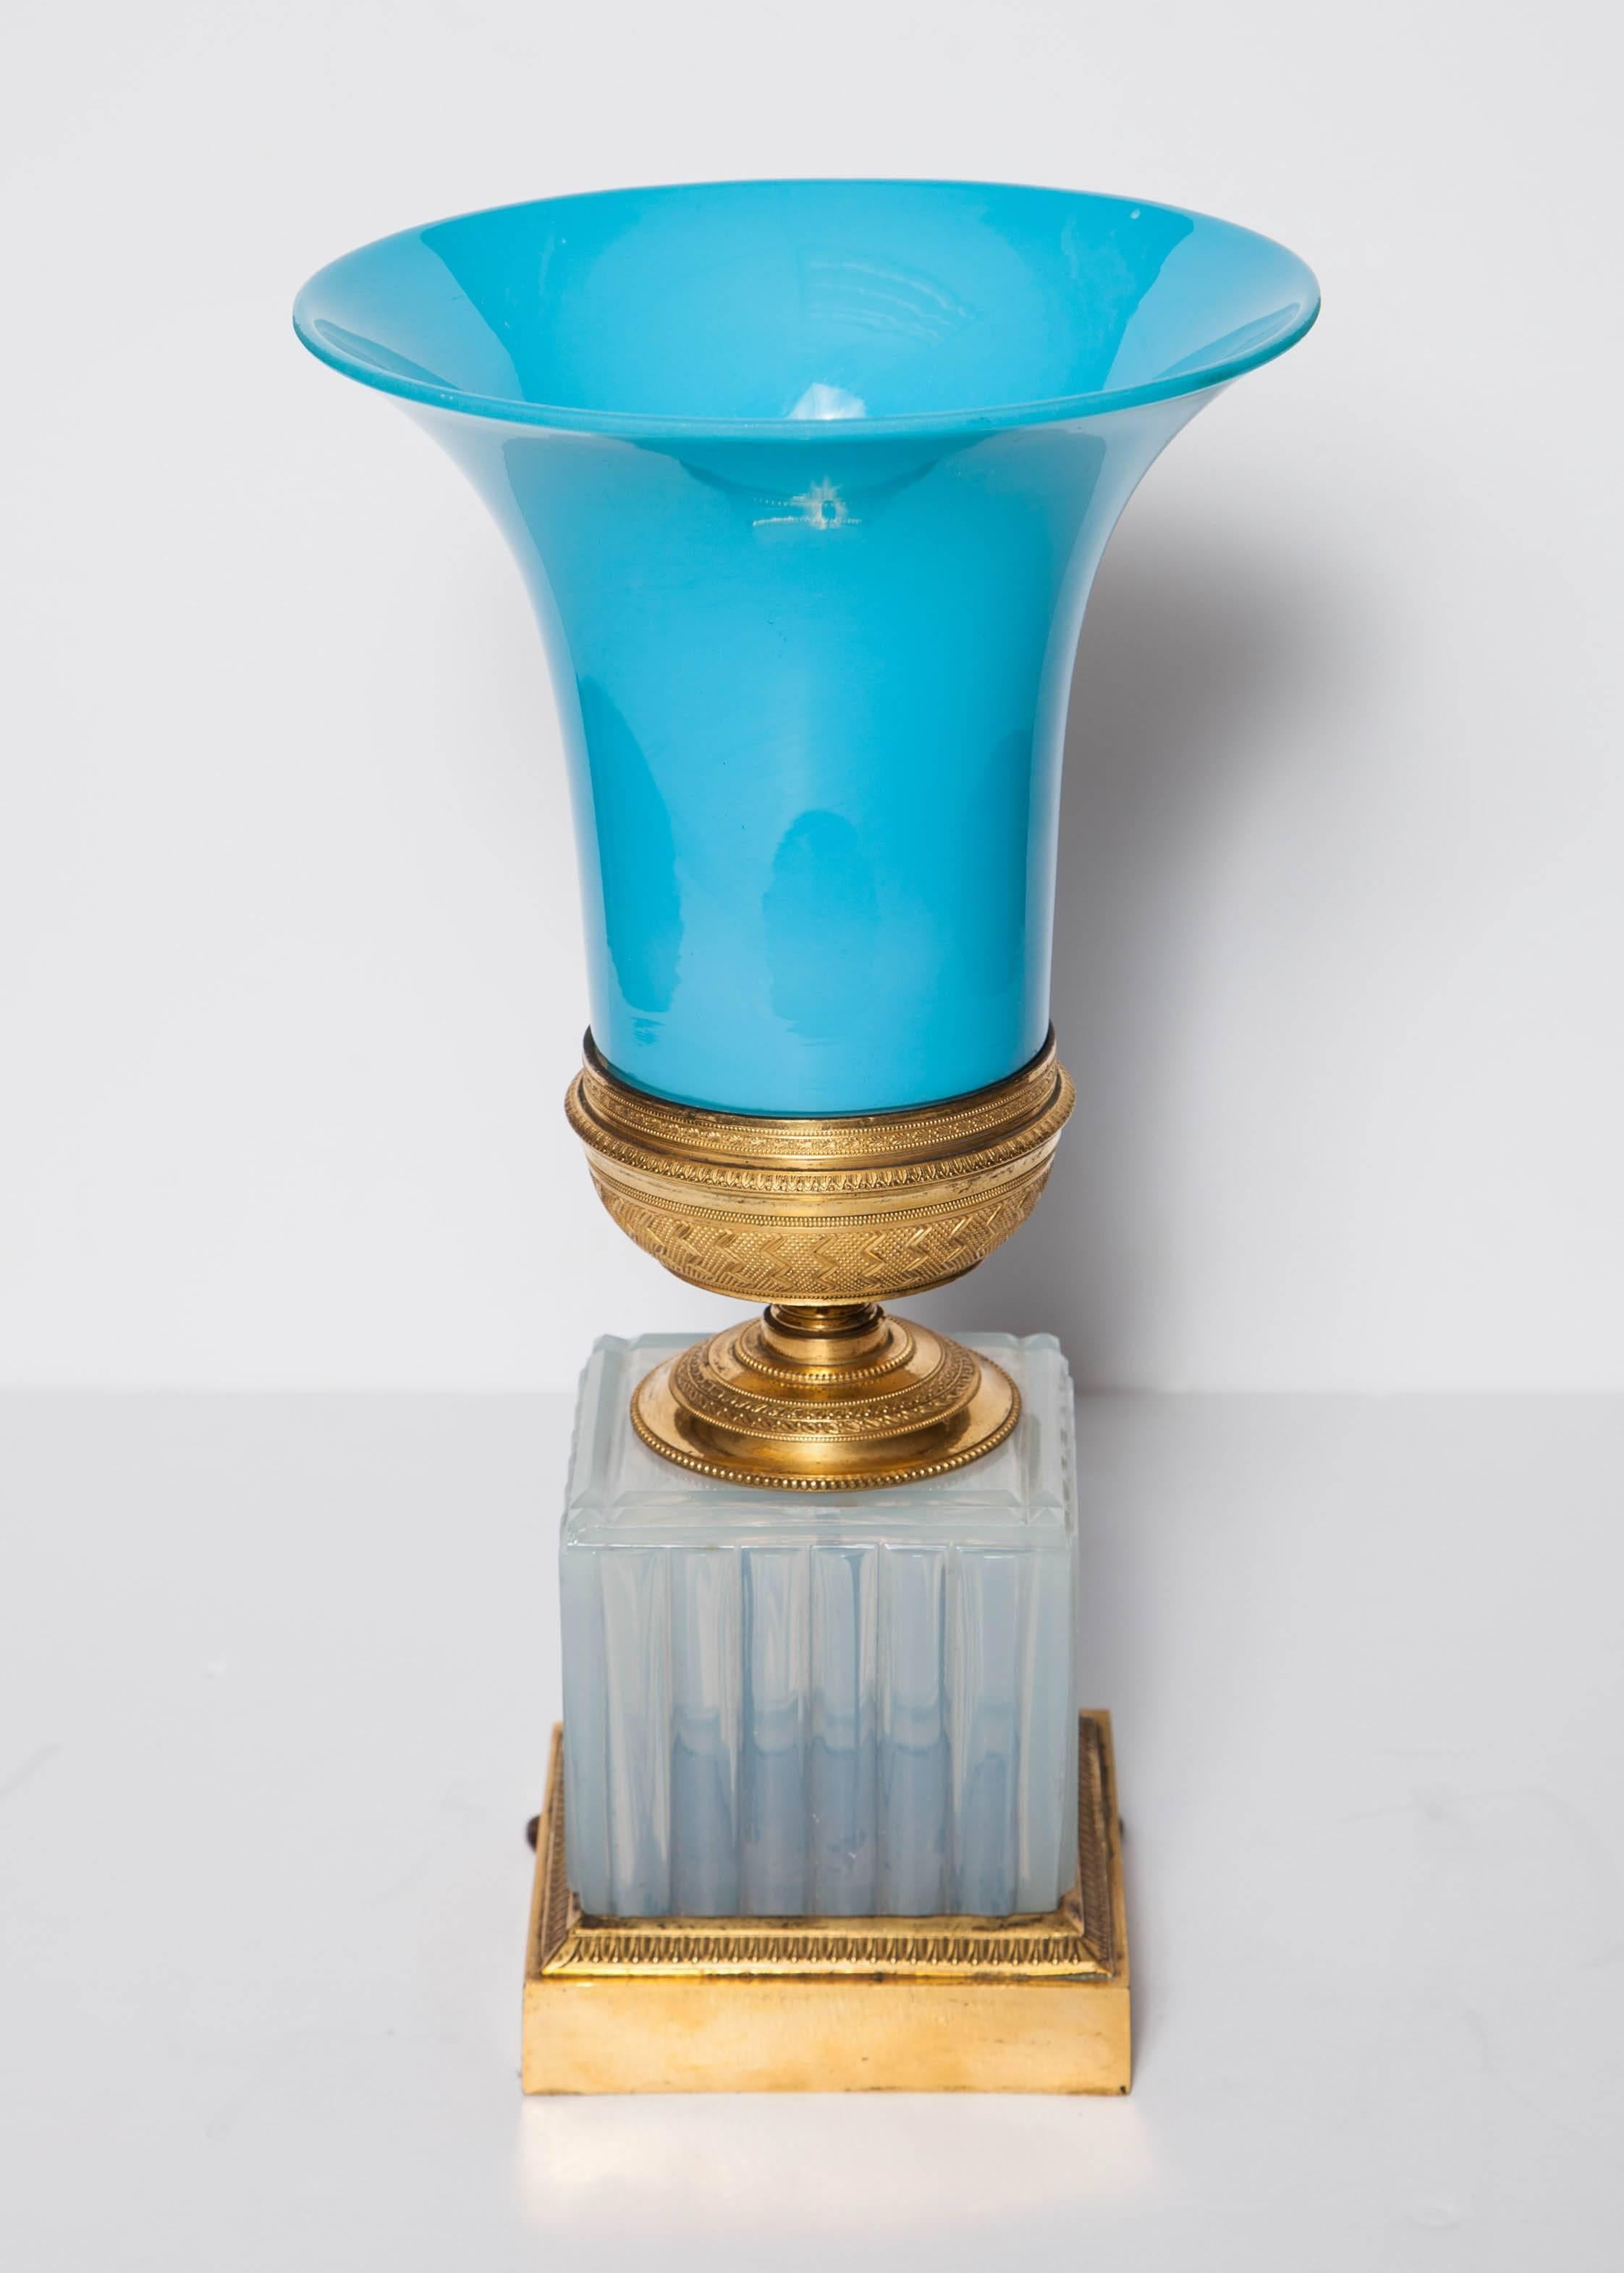 Fine Russian neoclassical blue and white opaline ormolu-mounted vase attributed to imperial glass manufactory. Of balester shape on a white opaline hand-diamond-cut and fluted plinth with open flower-head fixture, supported on ormolu base chased